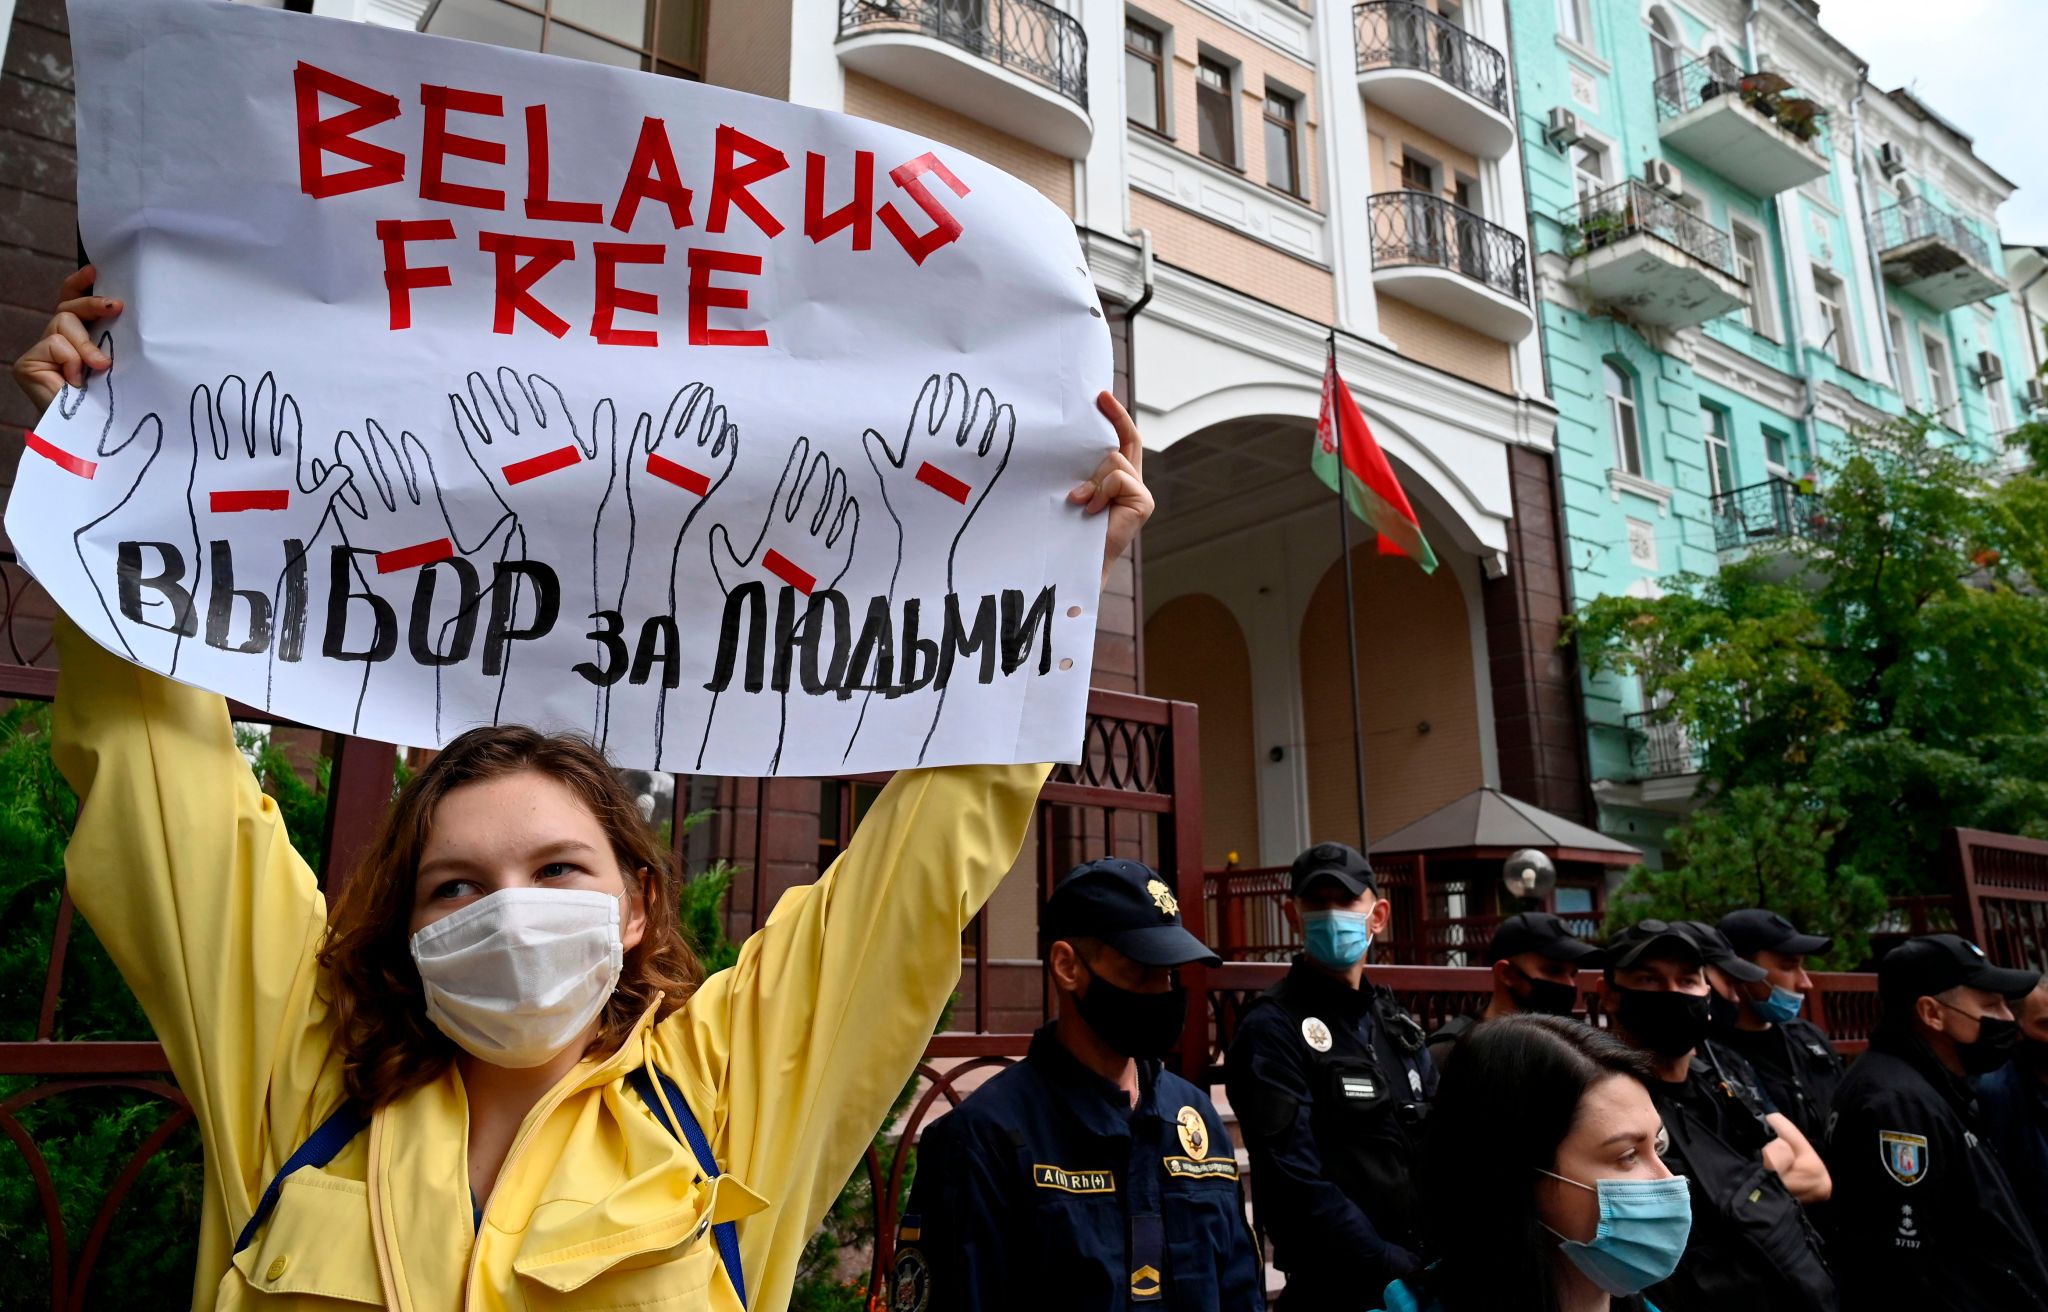 A lady holds up a sign in protest; the sign says "Belarus Free"